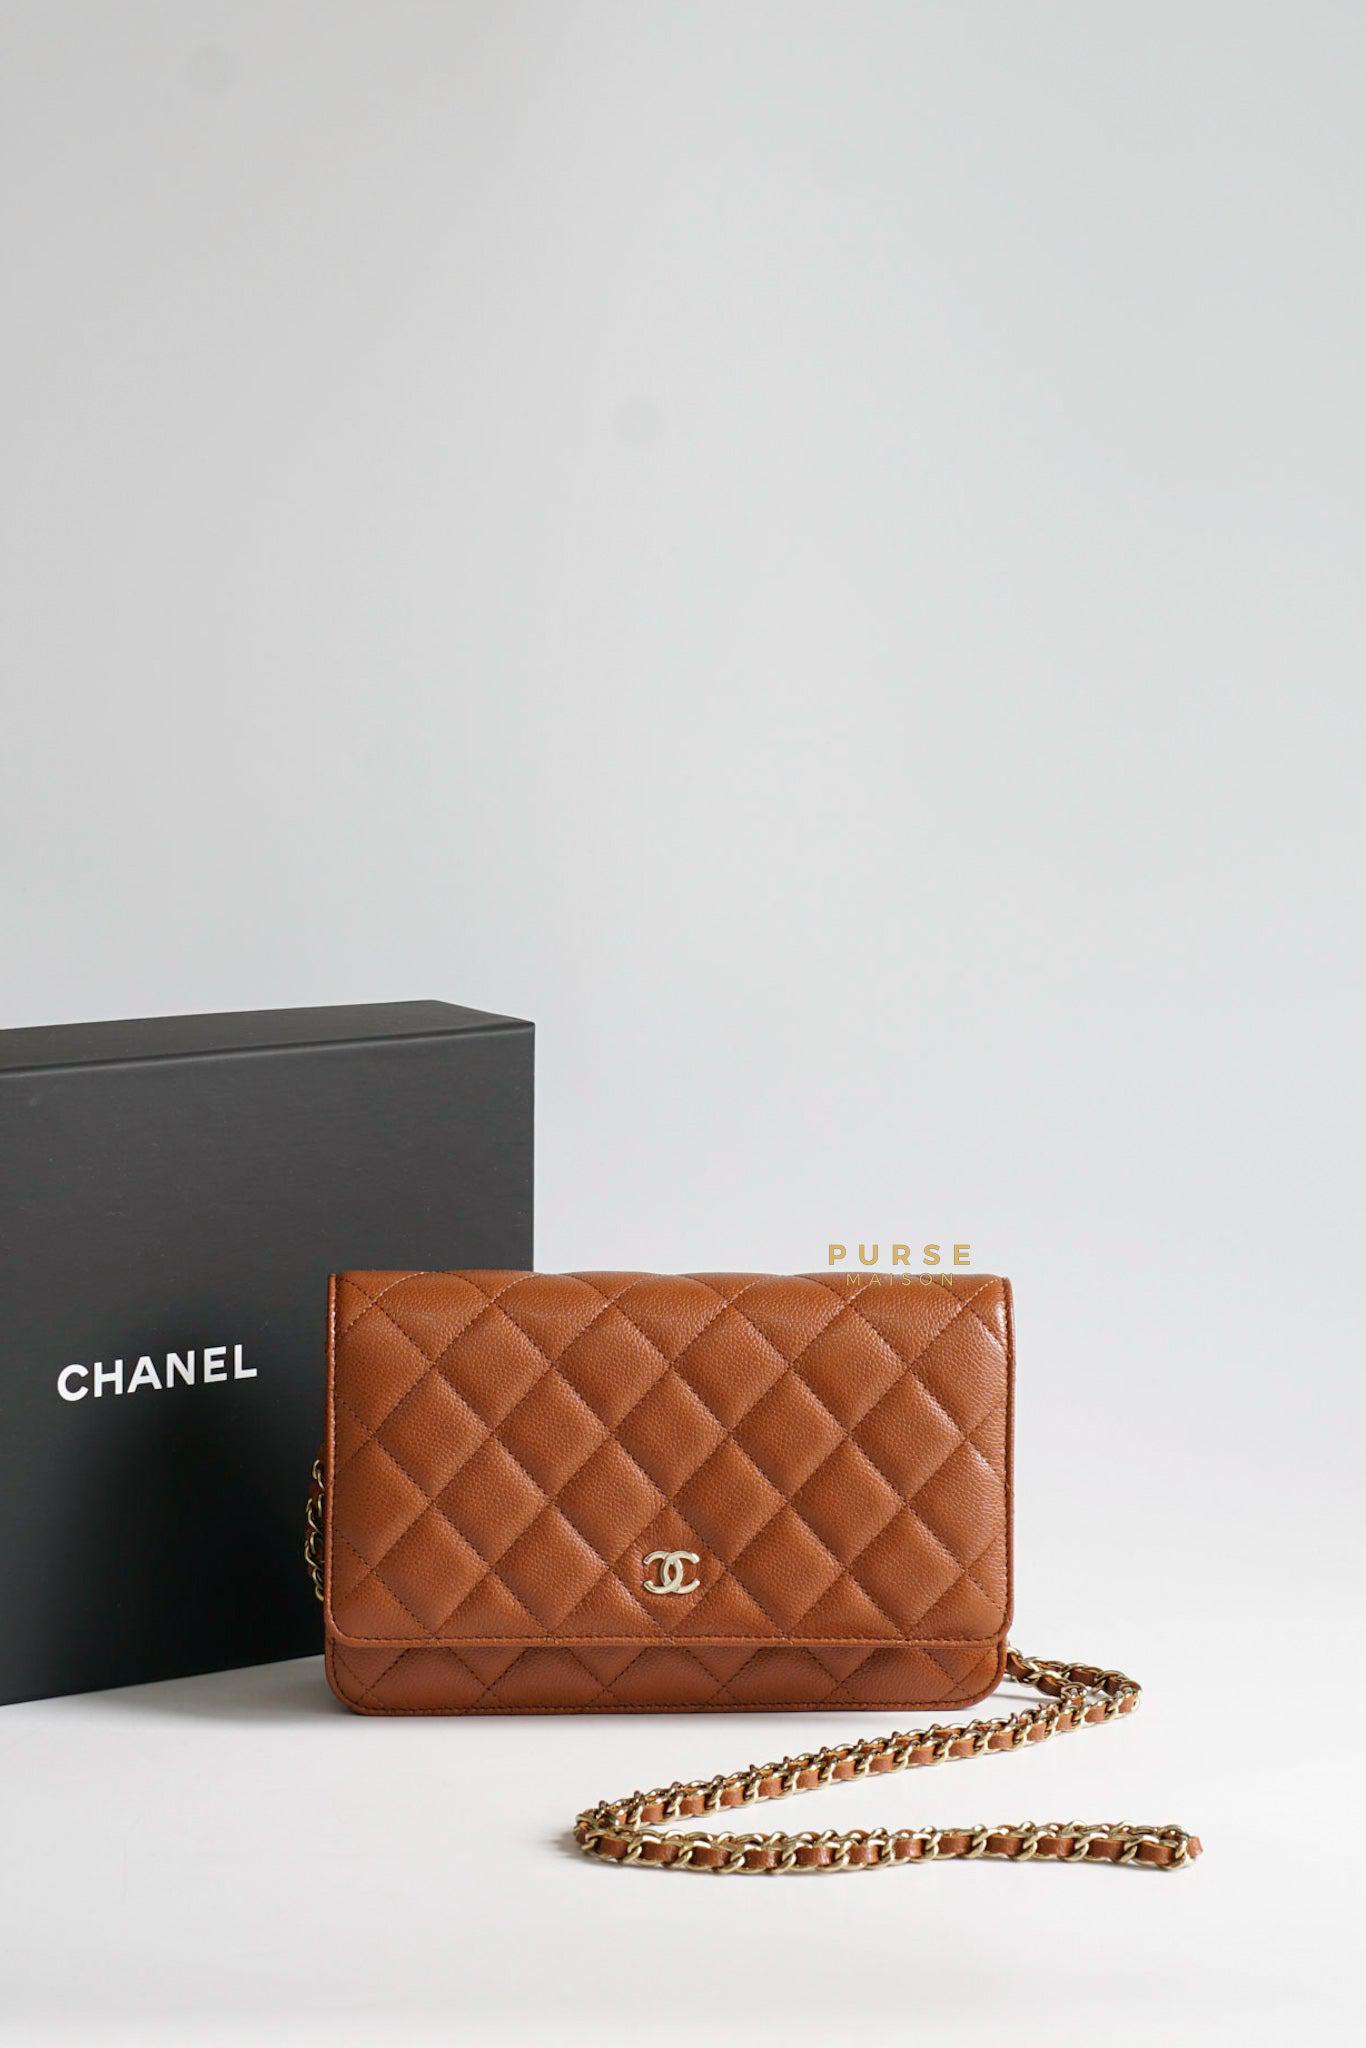 chanel large clutch